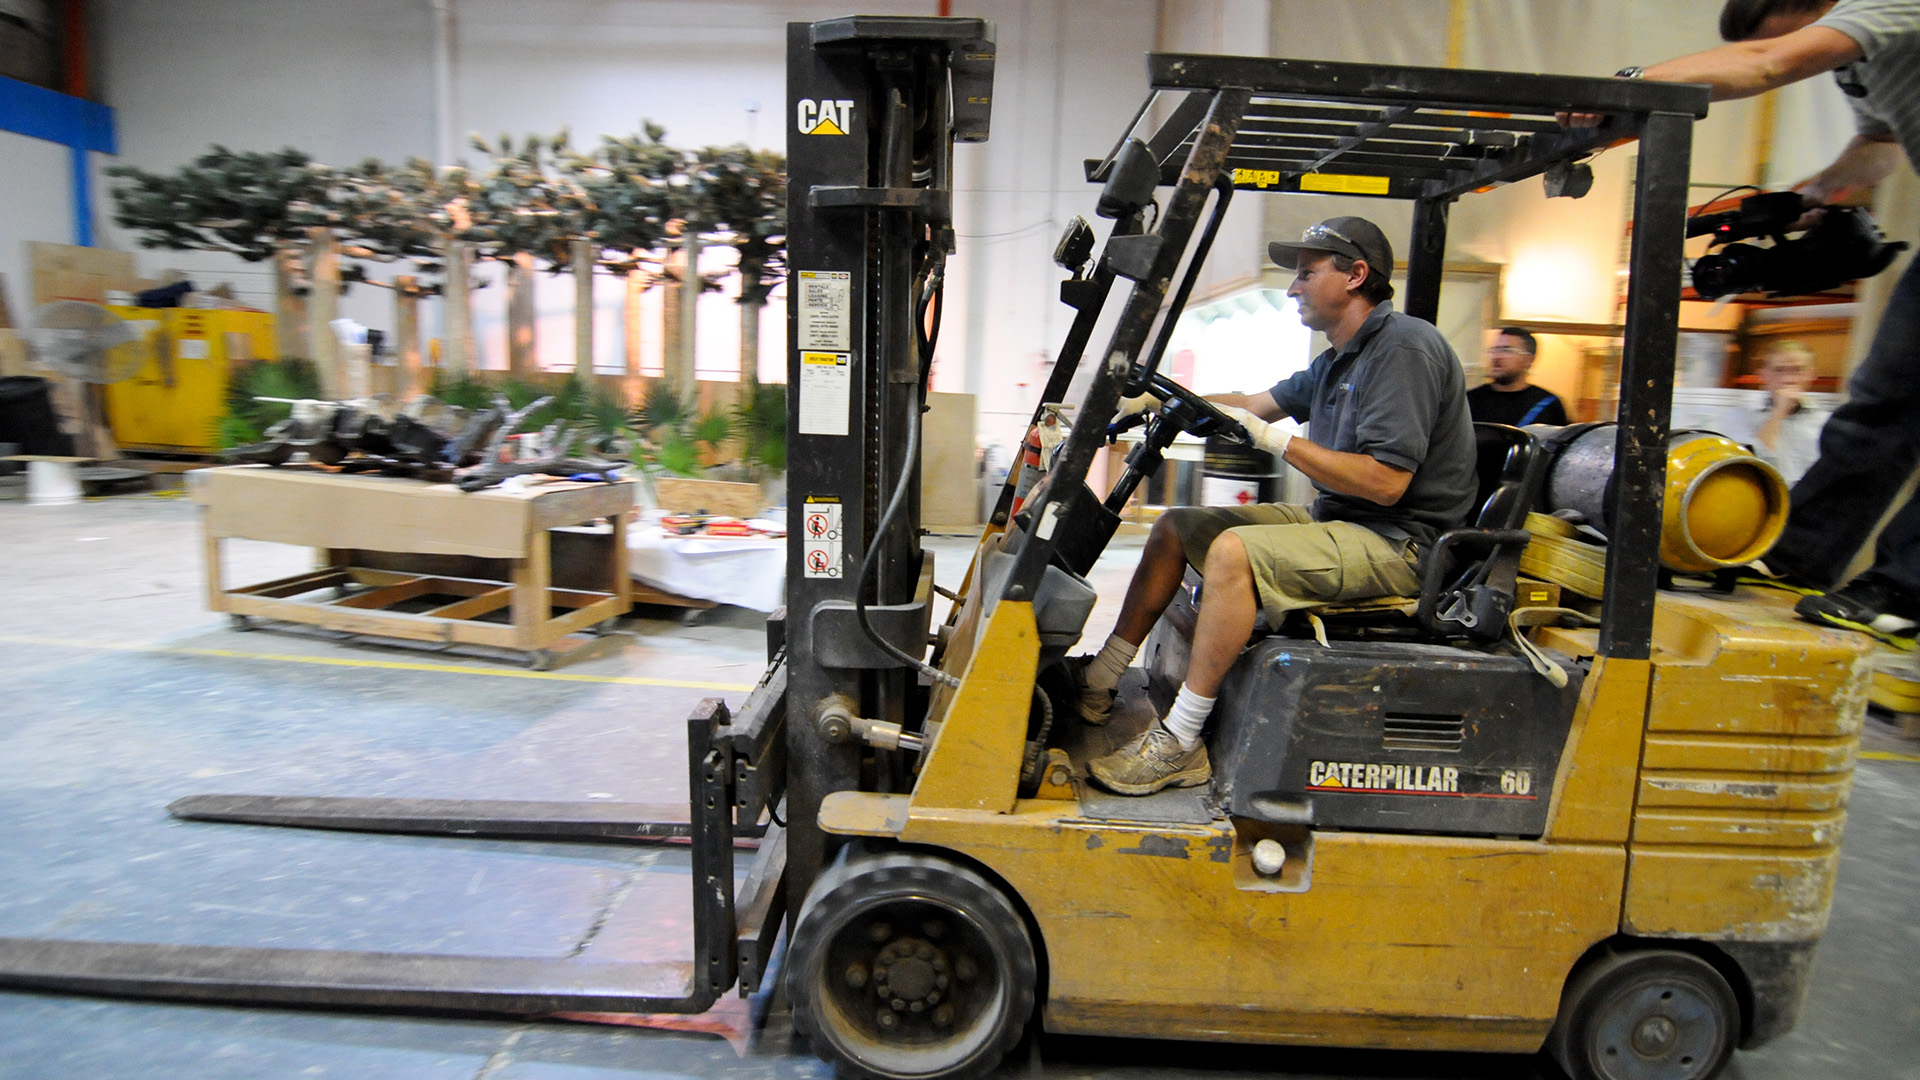 Jose driving forklift in warehouse with crew member filming. This is from Fish Tank Kings. [Photo of the day - April 2023]